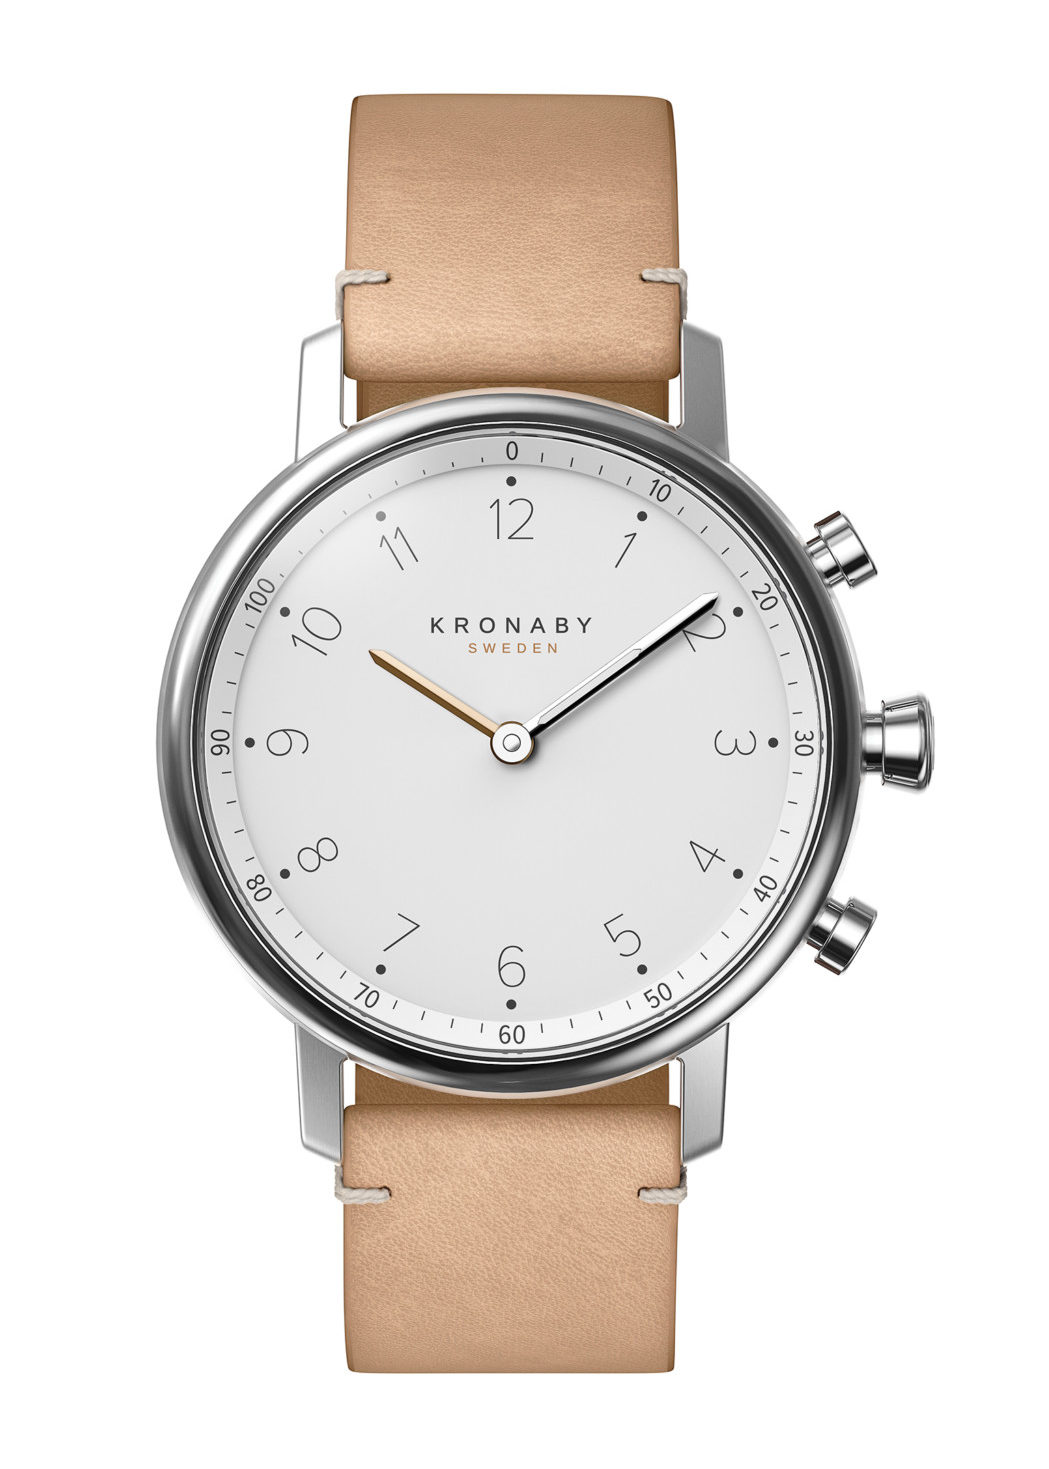 Pared down to the bare minimum, kronaby’s nord is refined, with a nod to kronaby’s nordic heritage. Key details include a matte finish dial and a case that combines stainless steel with double-domed, anti-reflective sapphire crystal. The case size is 38mm and the watch comes in four variants with 18mm bracelets in stainless steel, solid links/mesh or leather.